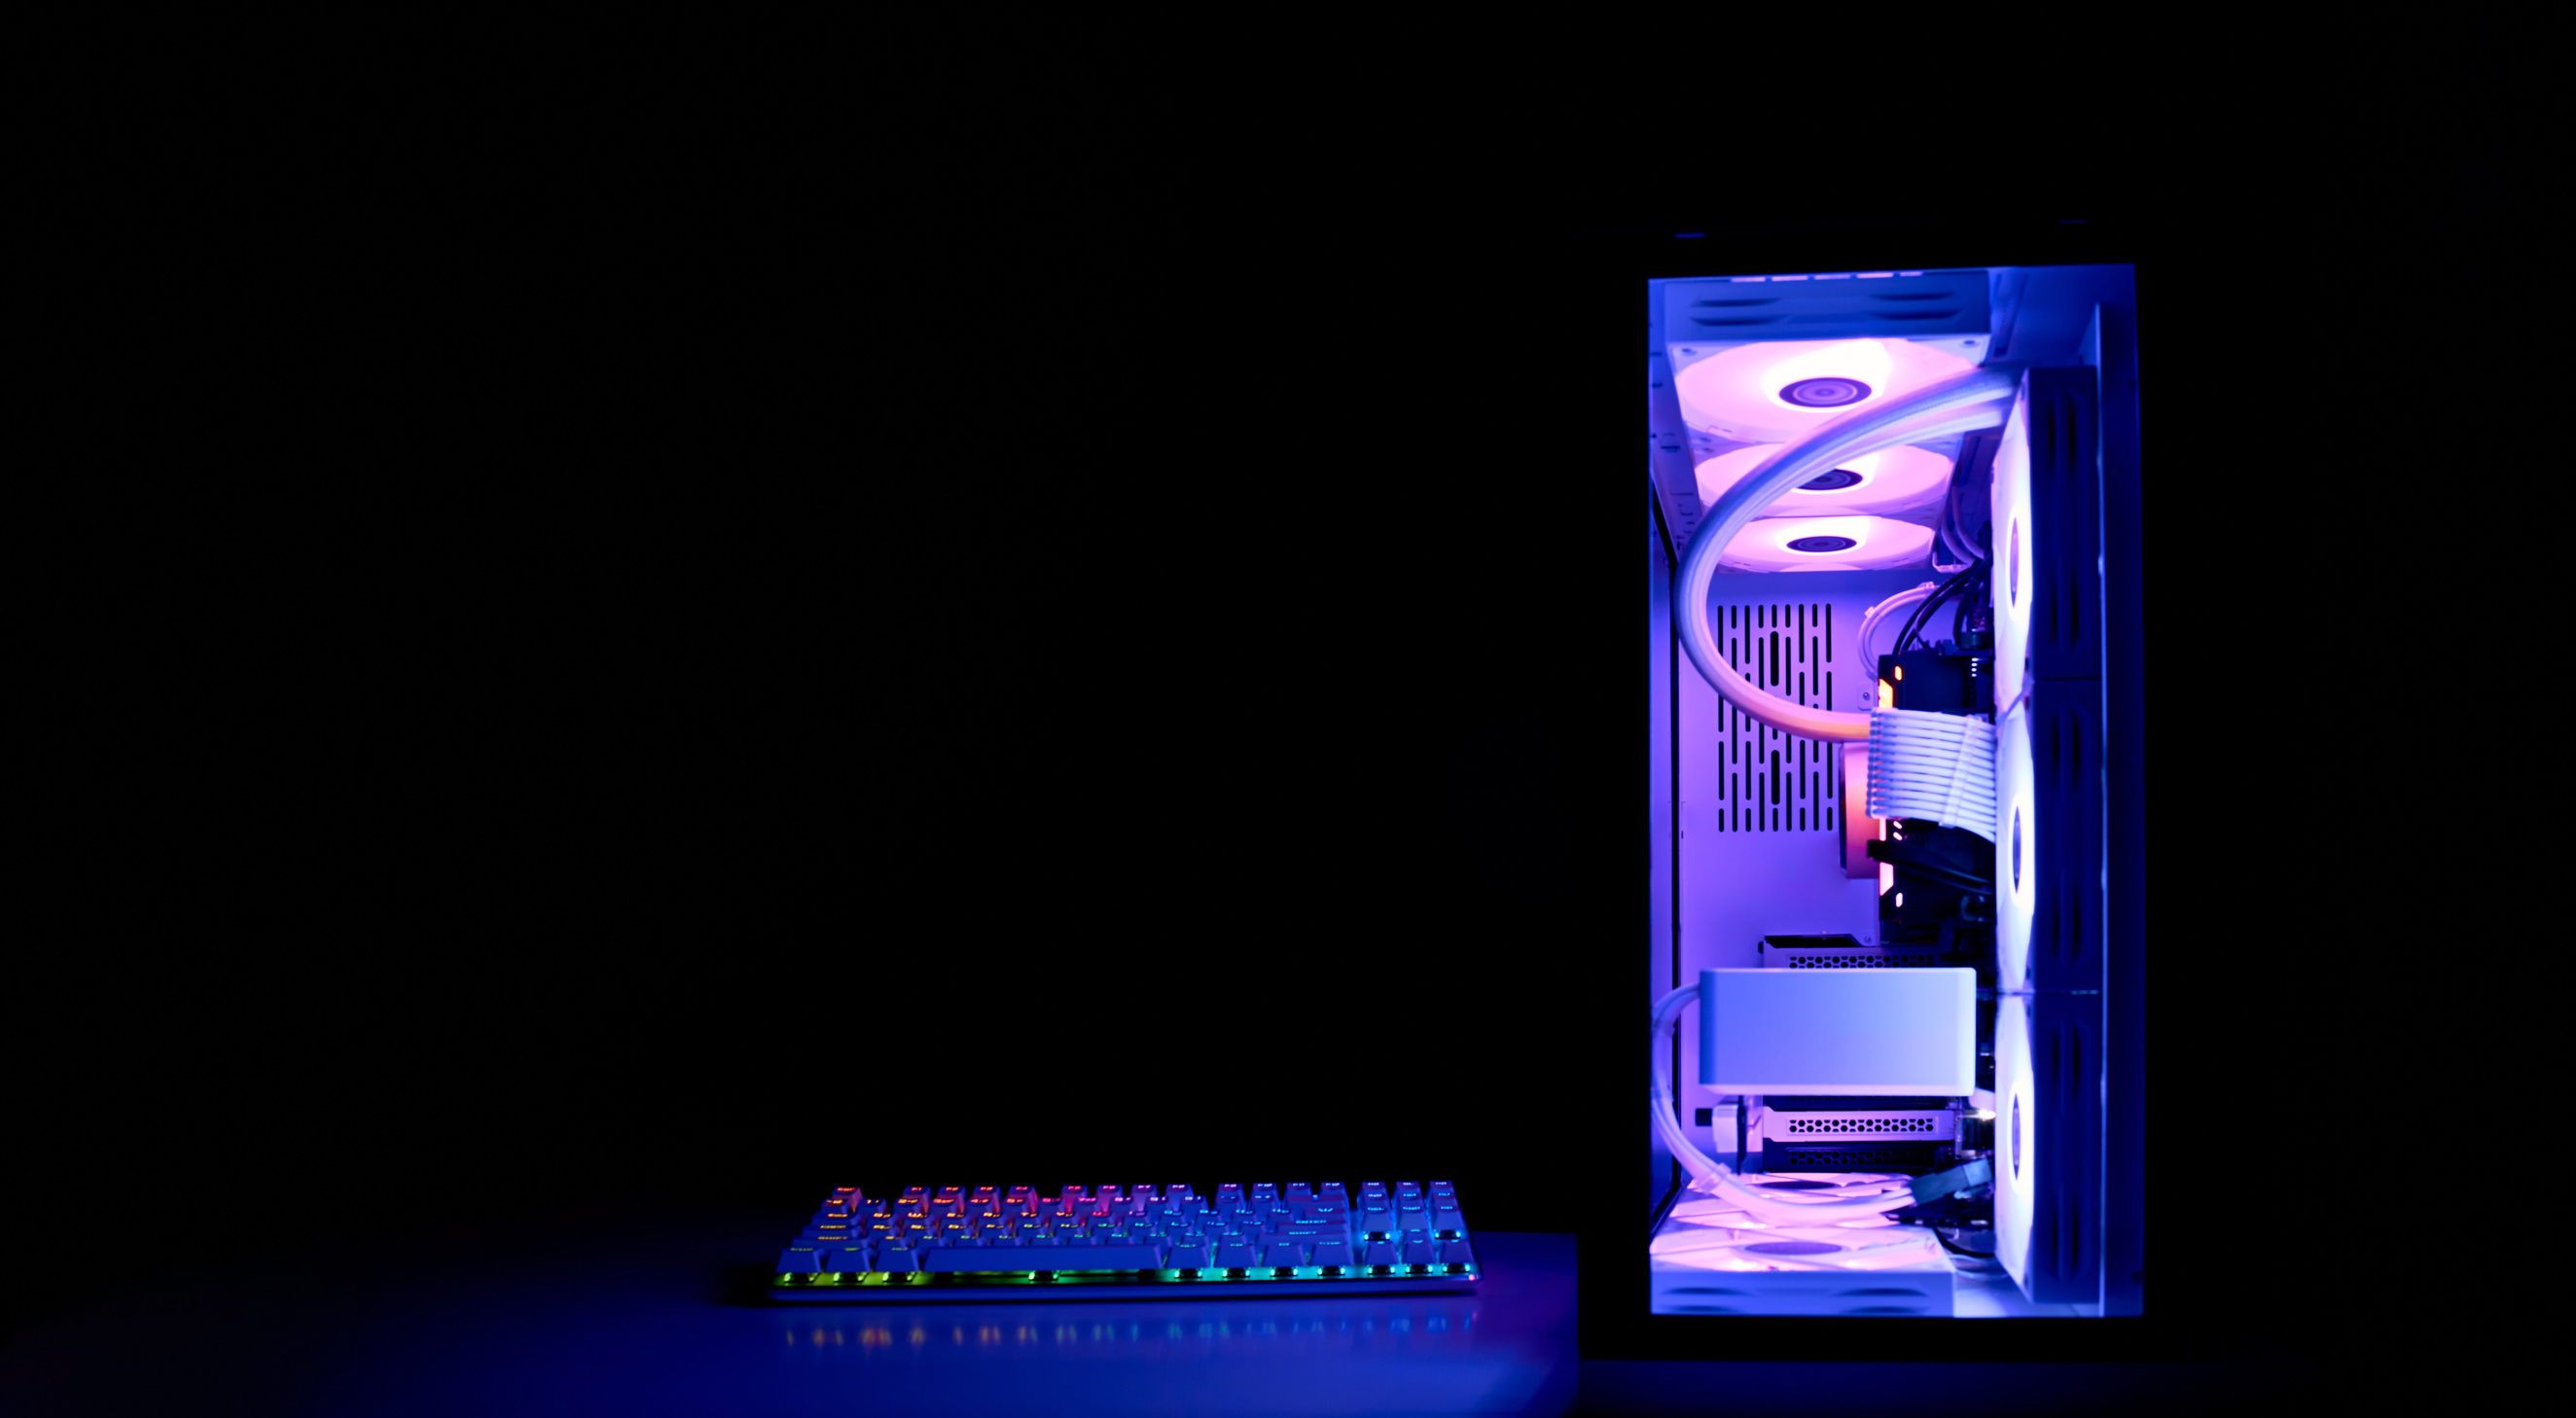 Gaming PC with rainbow LED light. Modern liquid cooled gaming computer. Powerful PC in a glass case, front view.